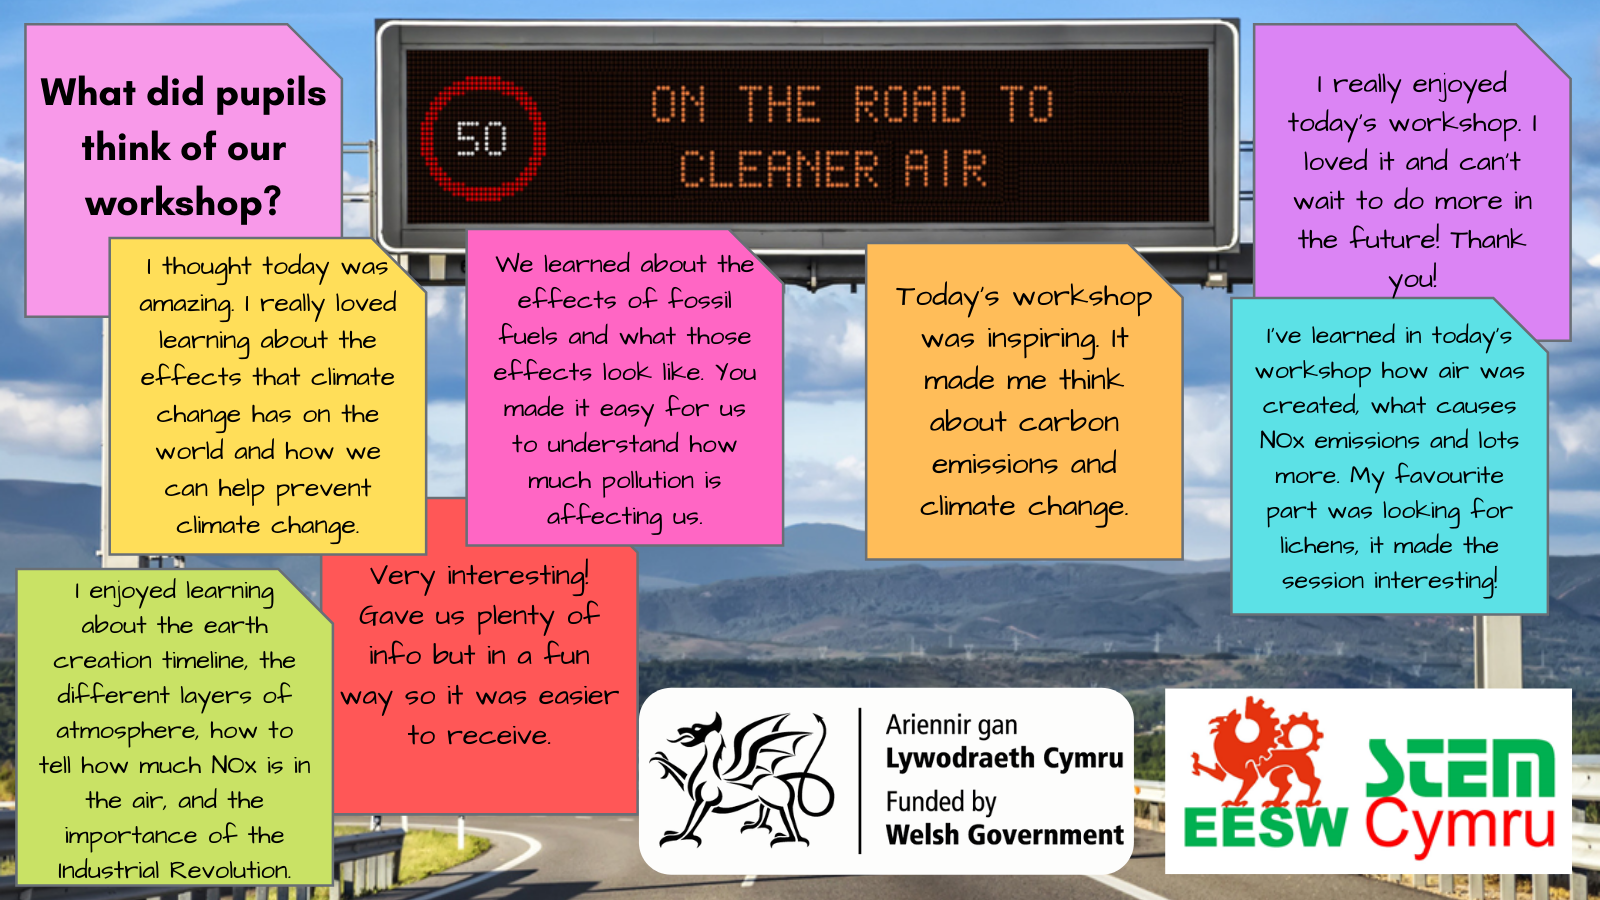 On The Road to Cleaner Air